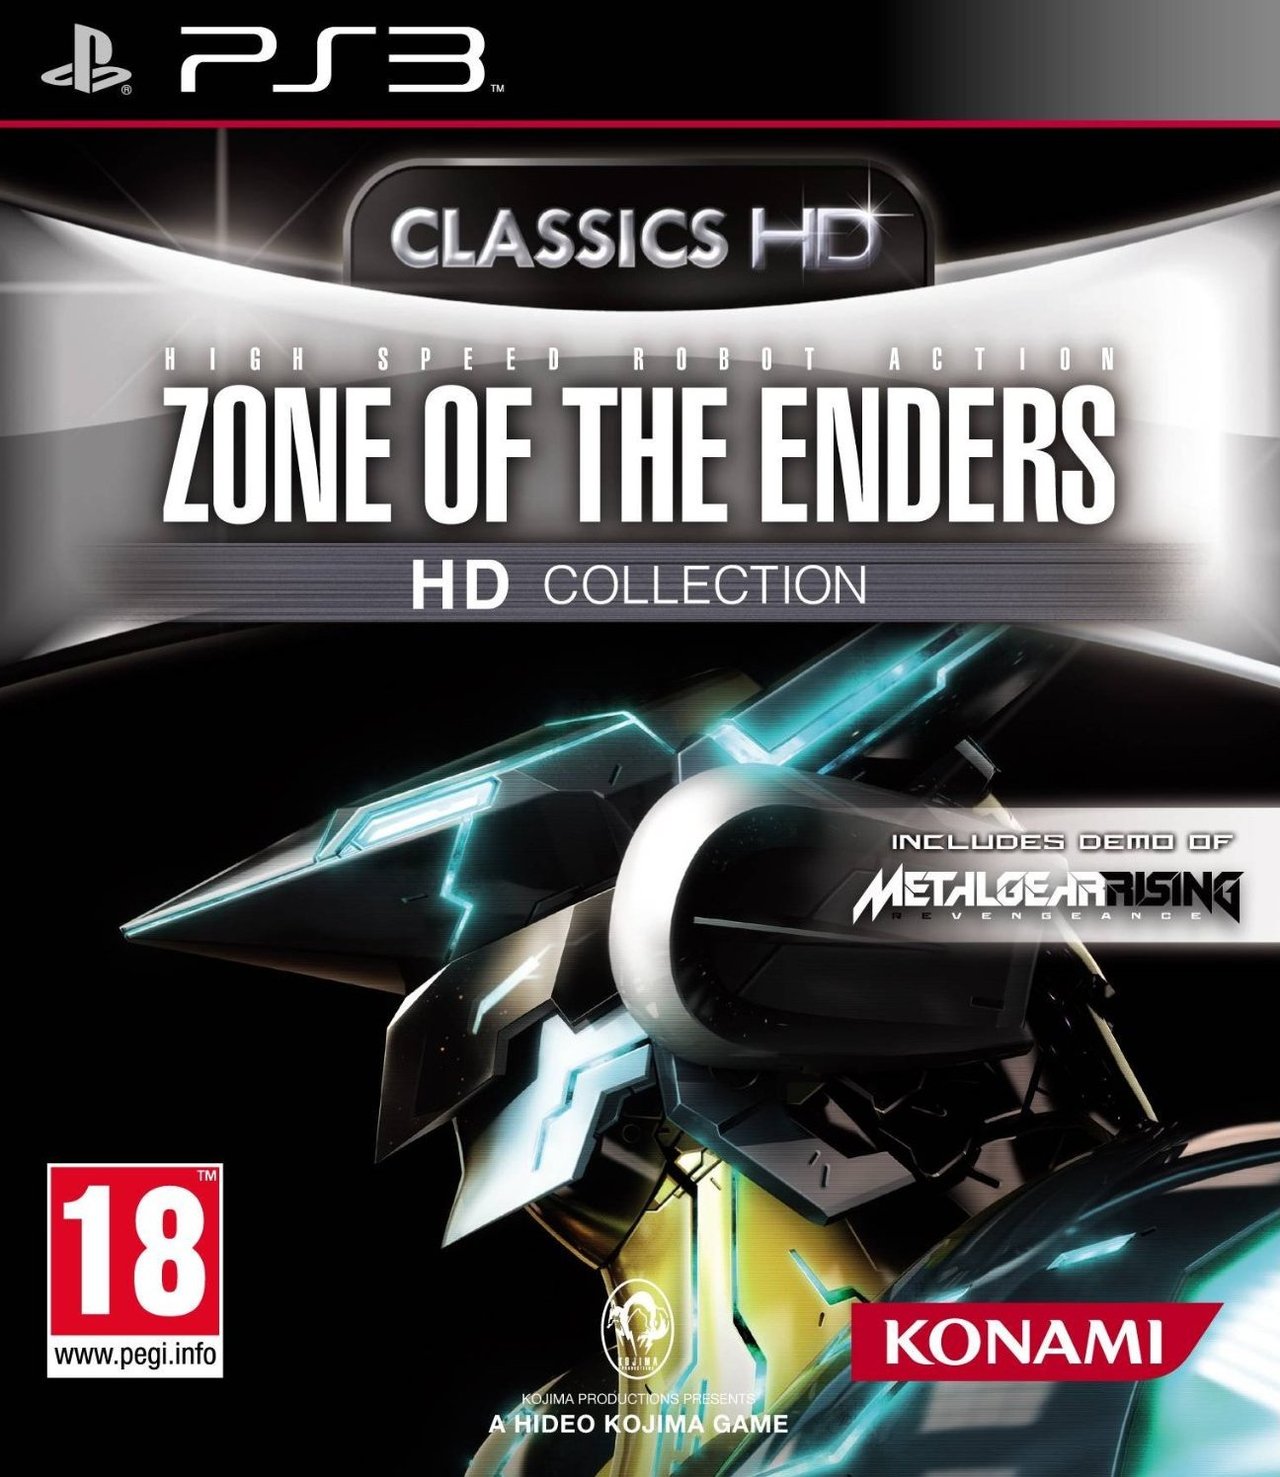 jaquette-zone-of-the-enders-hd-collection-playstation-3-ps3-cover-avant-g-1354265211.jpg